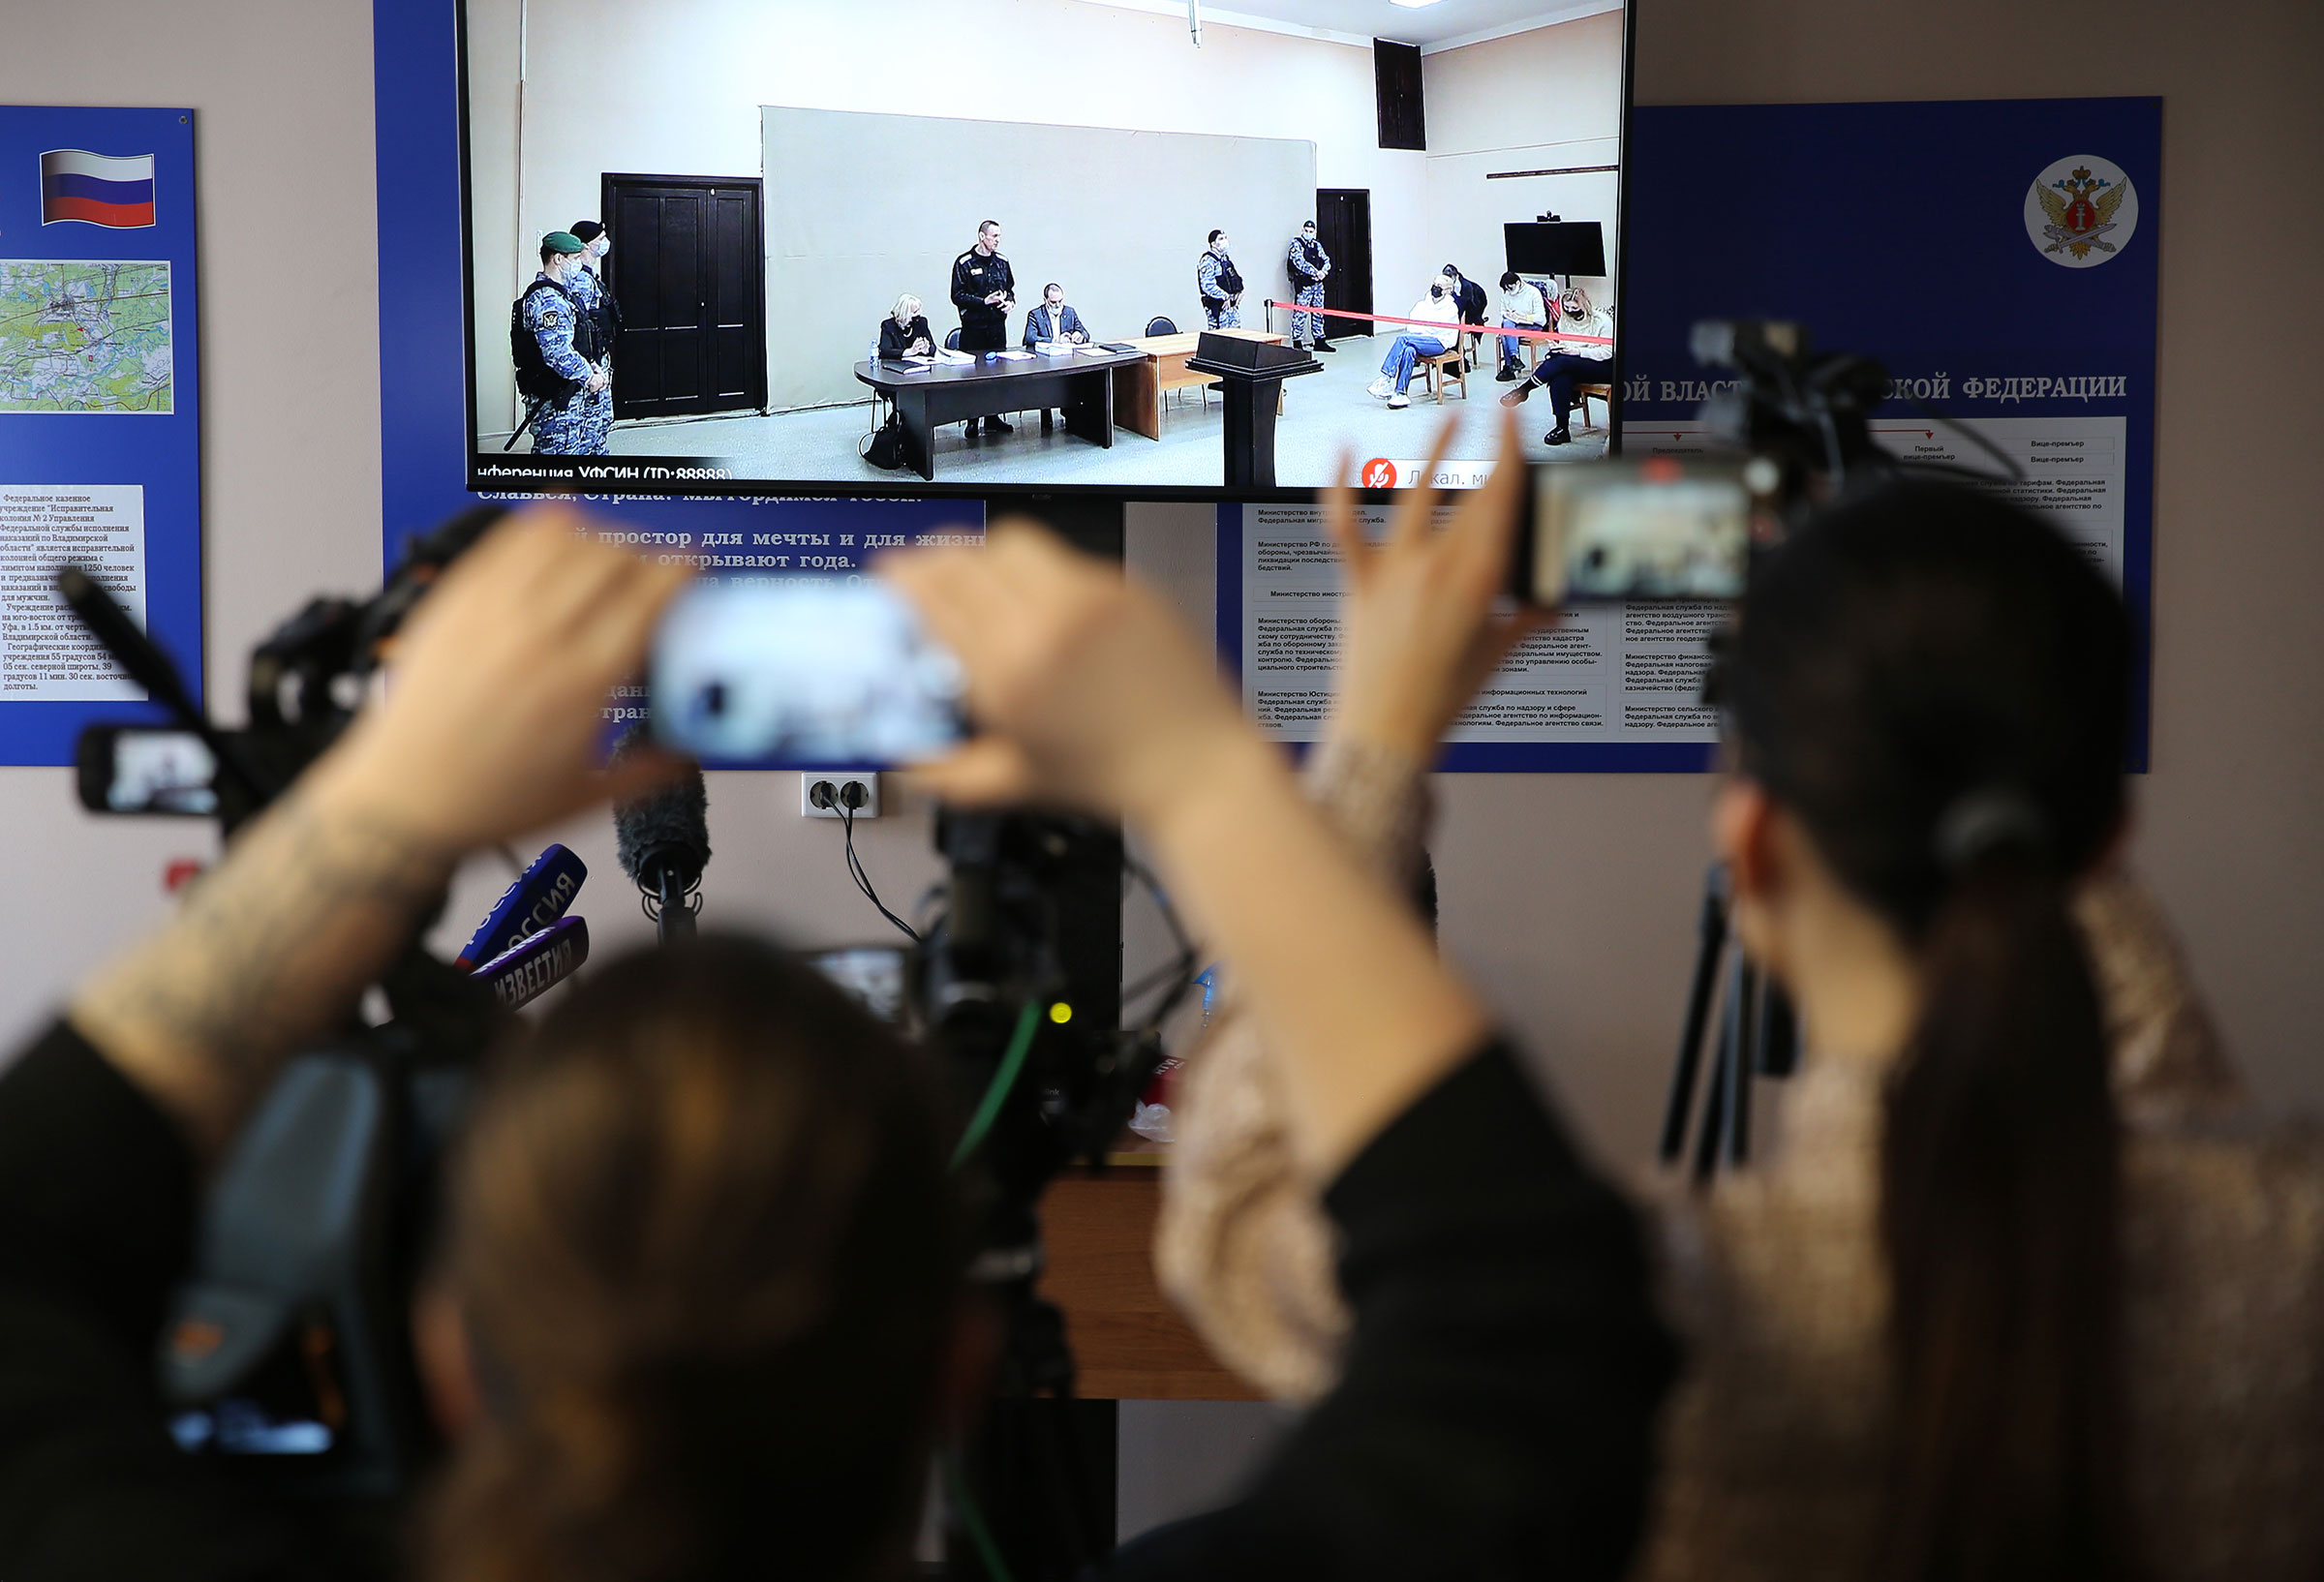 Members of the media take photographs of the screen showing Russian opposition politician Alexei Navalny at the penal colony during the trial in Pokrov, Vladimir region, Russia on Feb. 15, 2022. (Mikhail Svetlov—Getty Images)